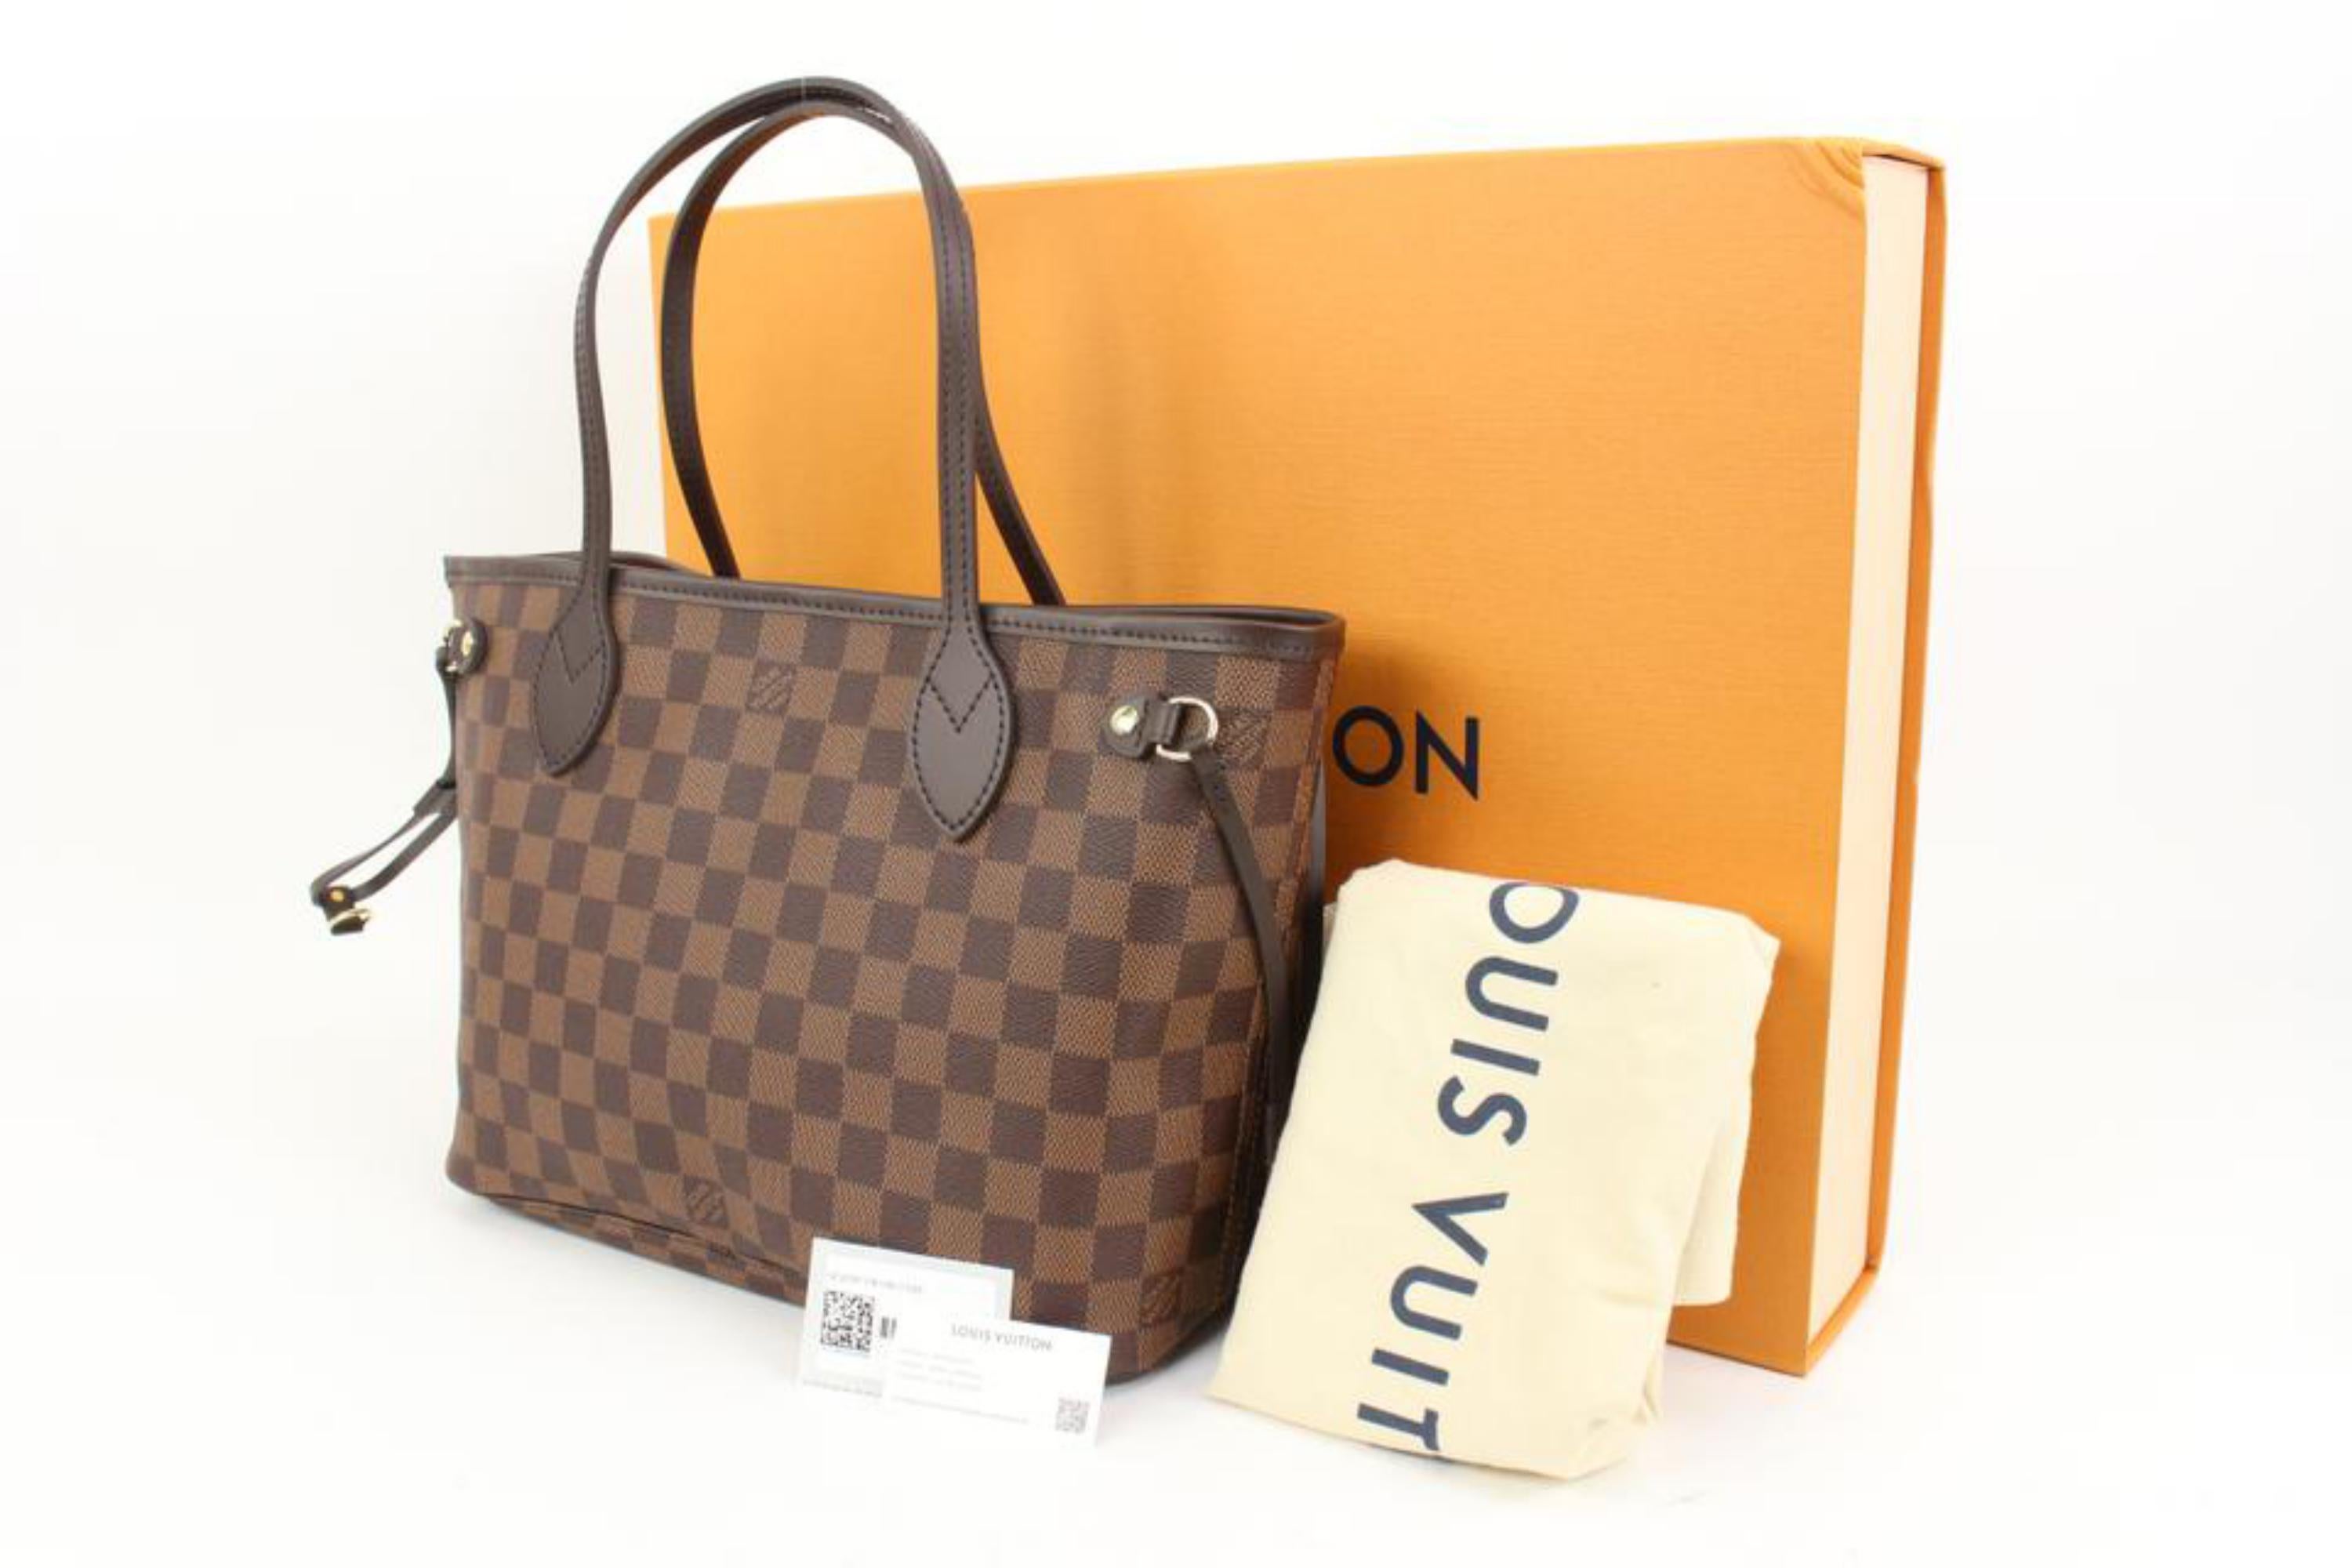 Louis Vuitton Small Damier Ebene Neverfull PM Tote Bag 44lk82
Date Code/Serial Number: RFID Chip
Made In: France
Measurements: Length:  14.5